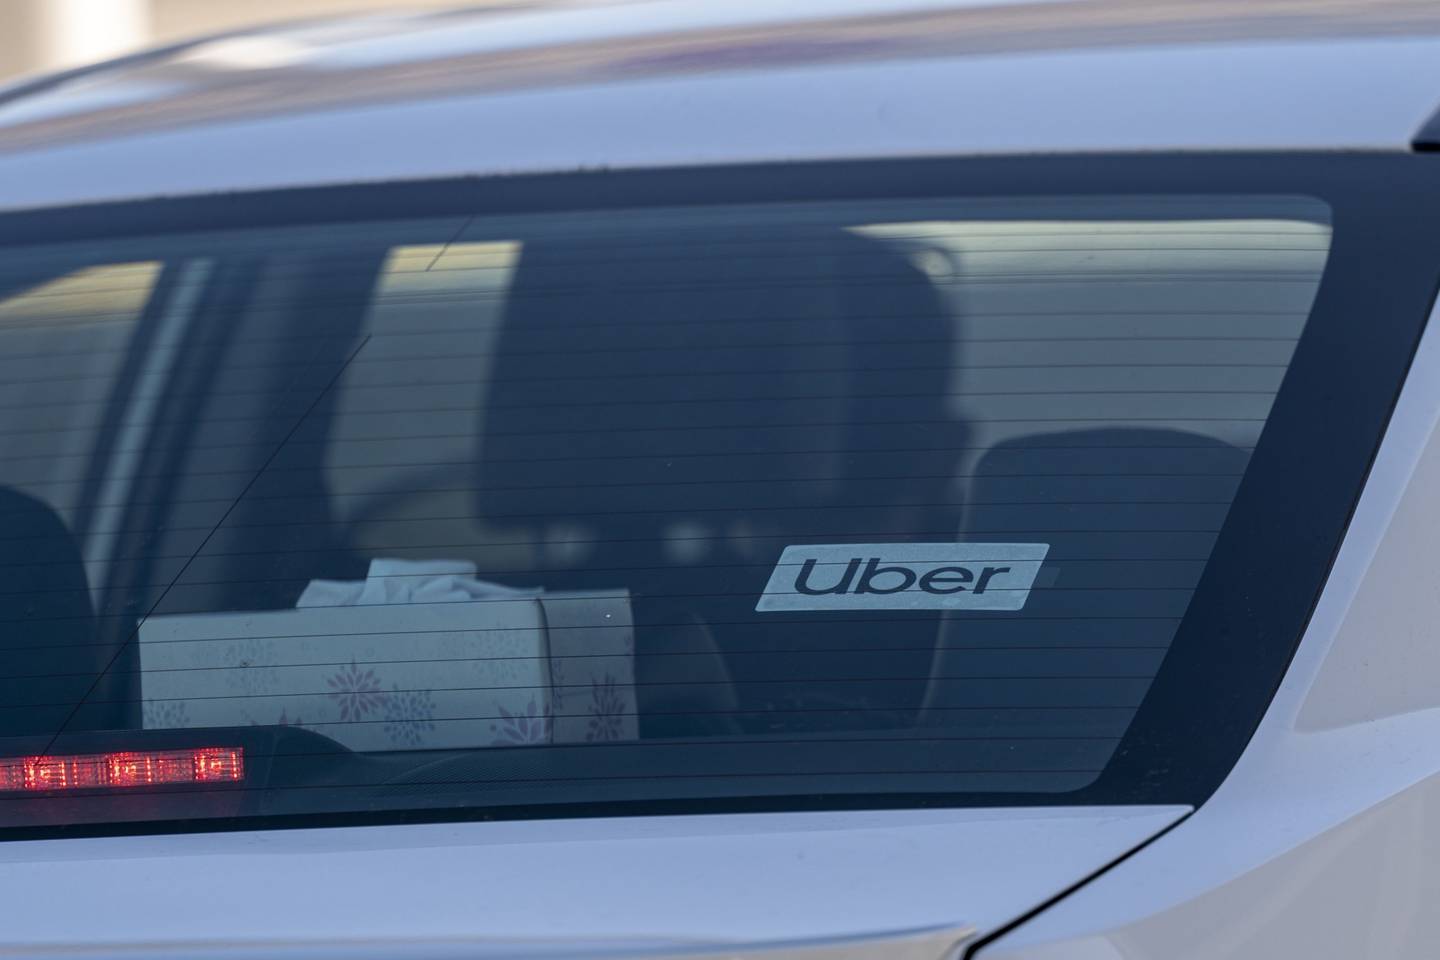 Uber signage on a vehicle at Oakland International Airport in Oakland, California.